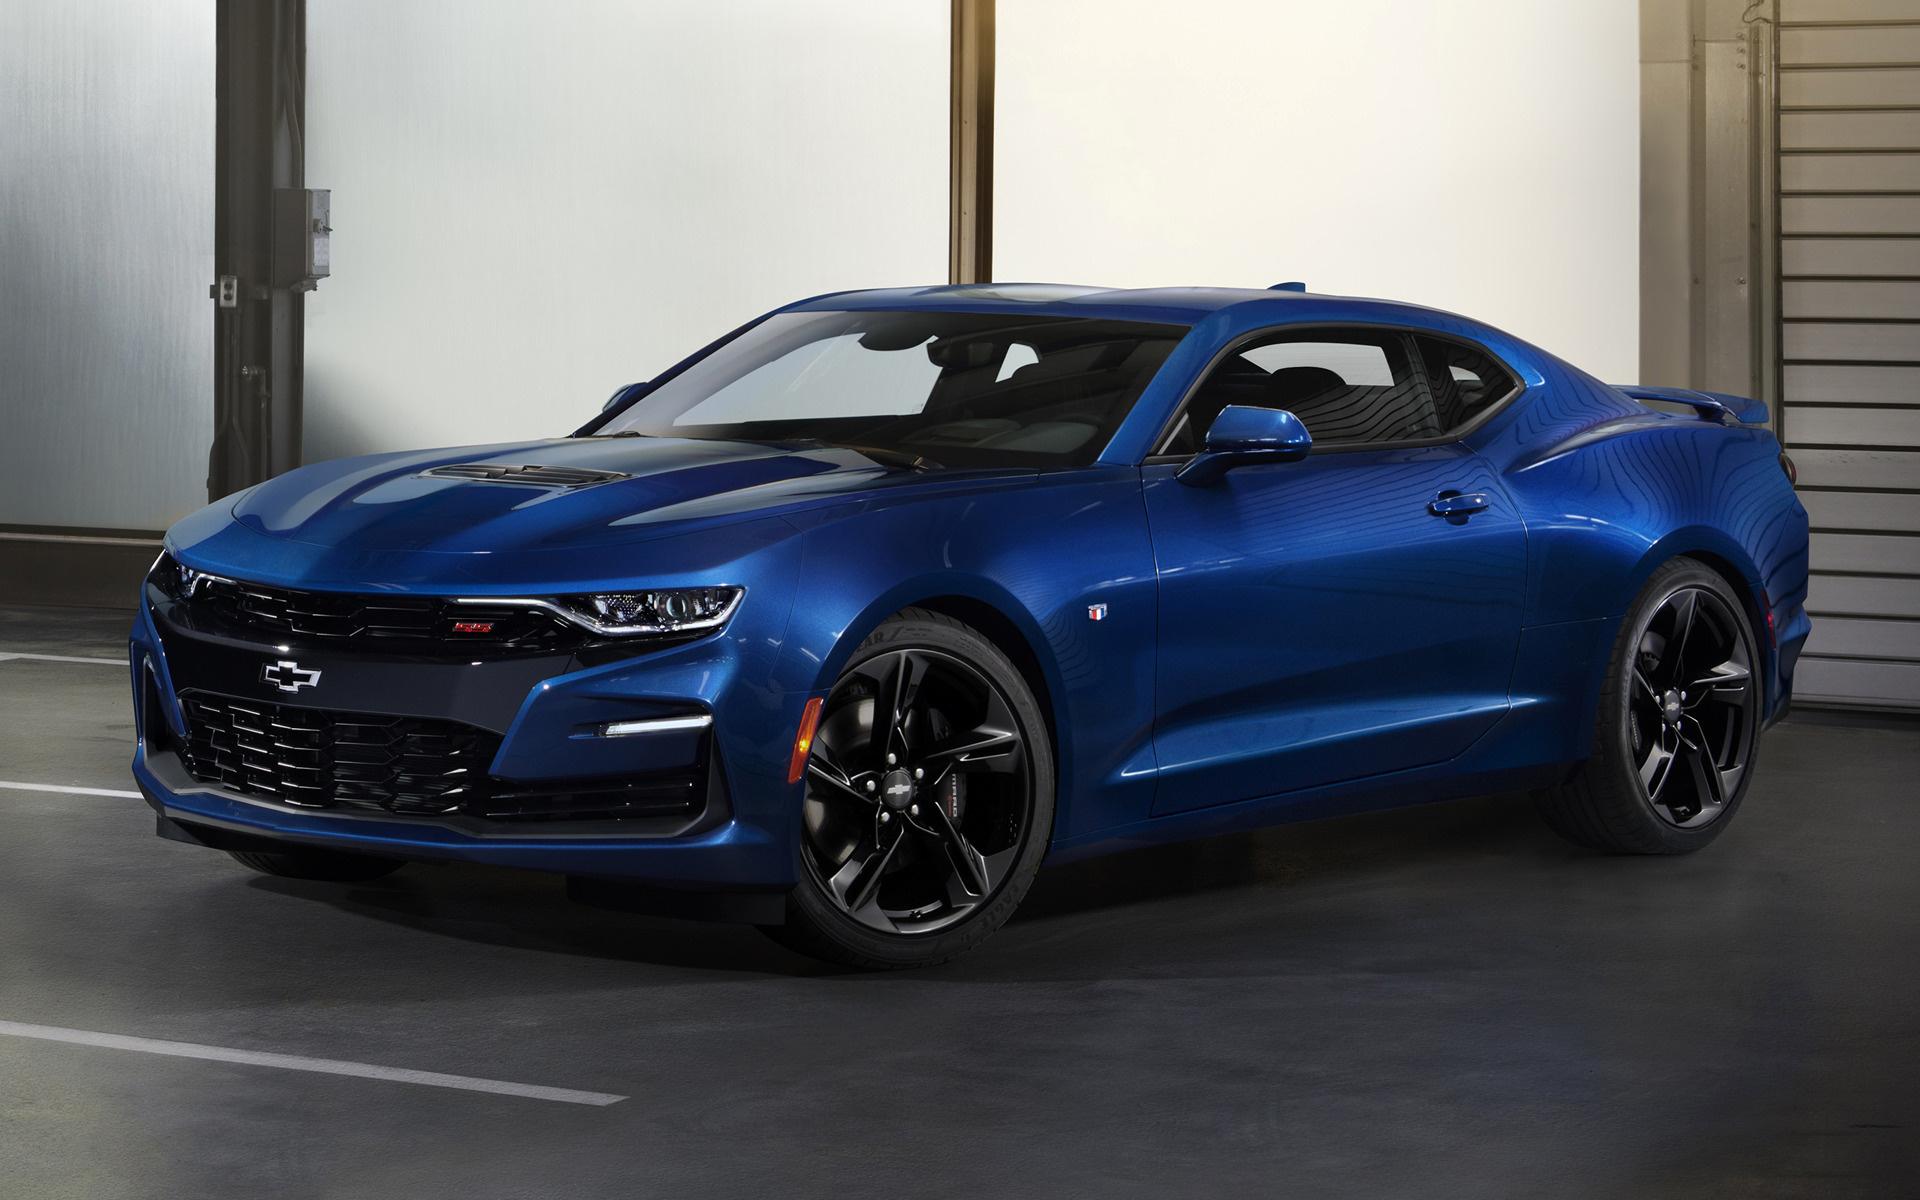 Chevrolet Camaro SS and HD Image